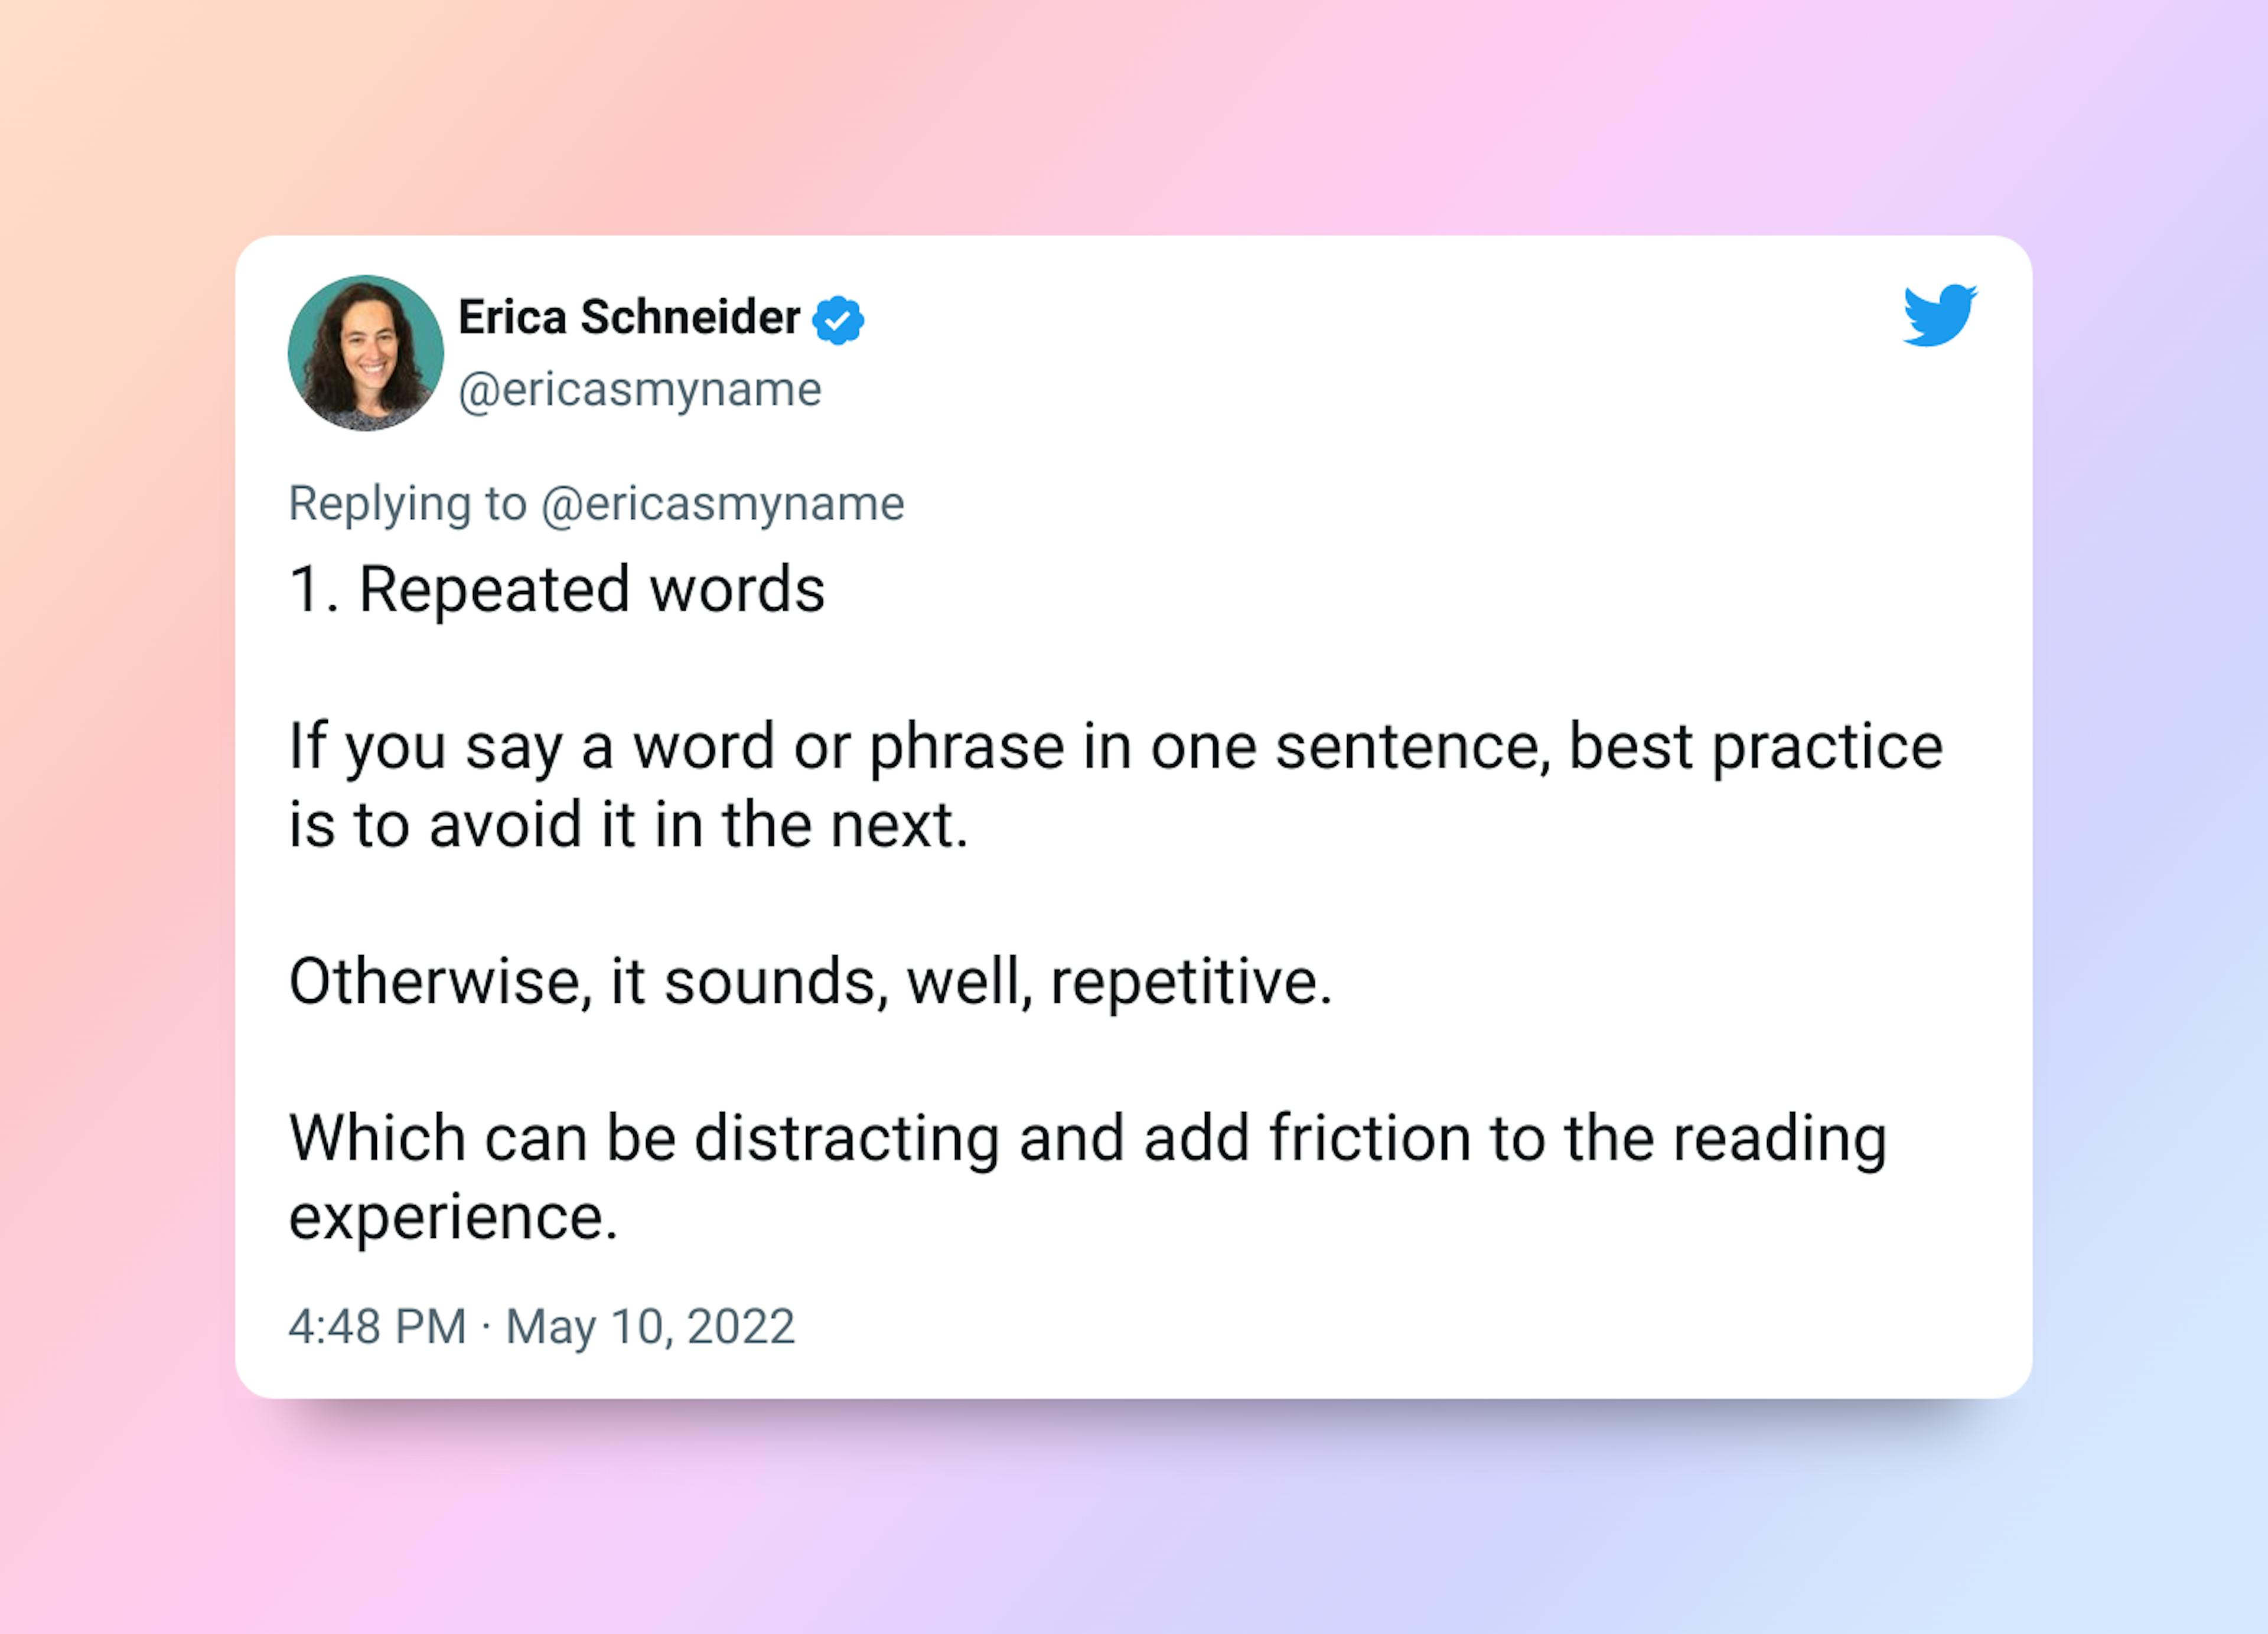 Tweet from Erica Schneider, Head of Content at Grizzle.